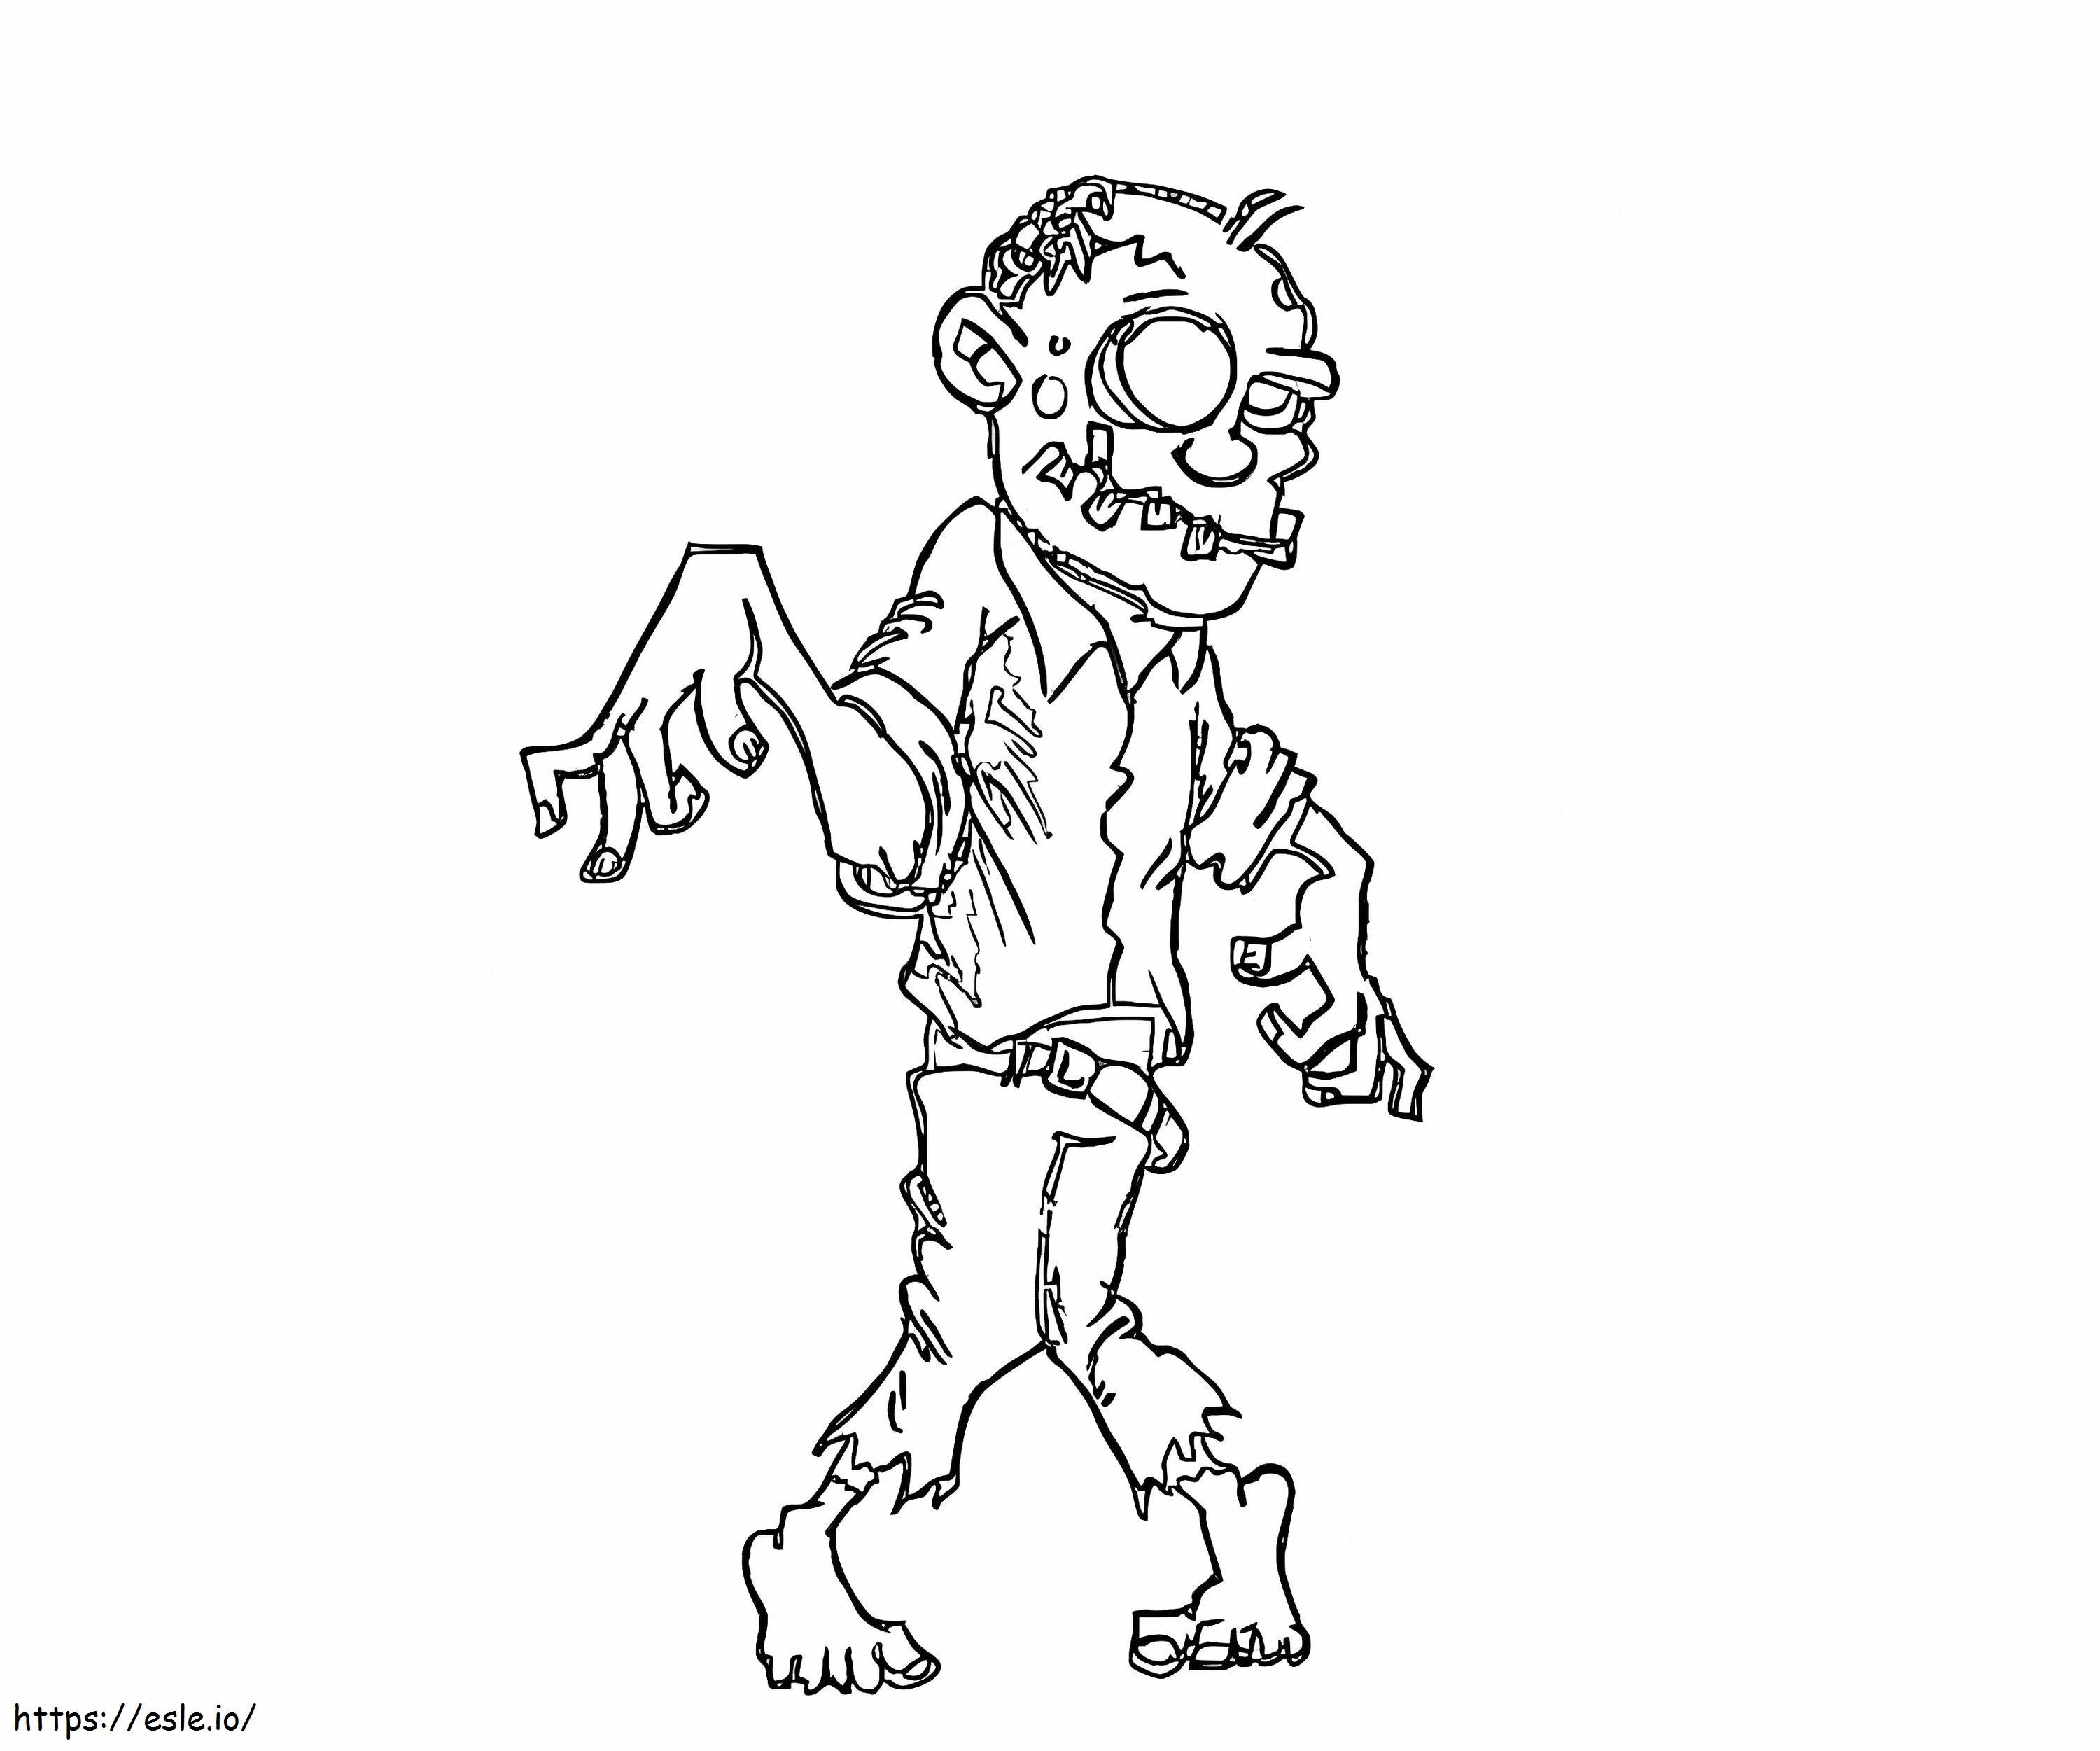 Awesome Zombie coloring page